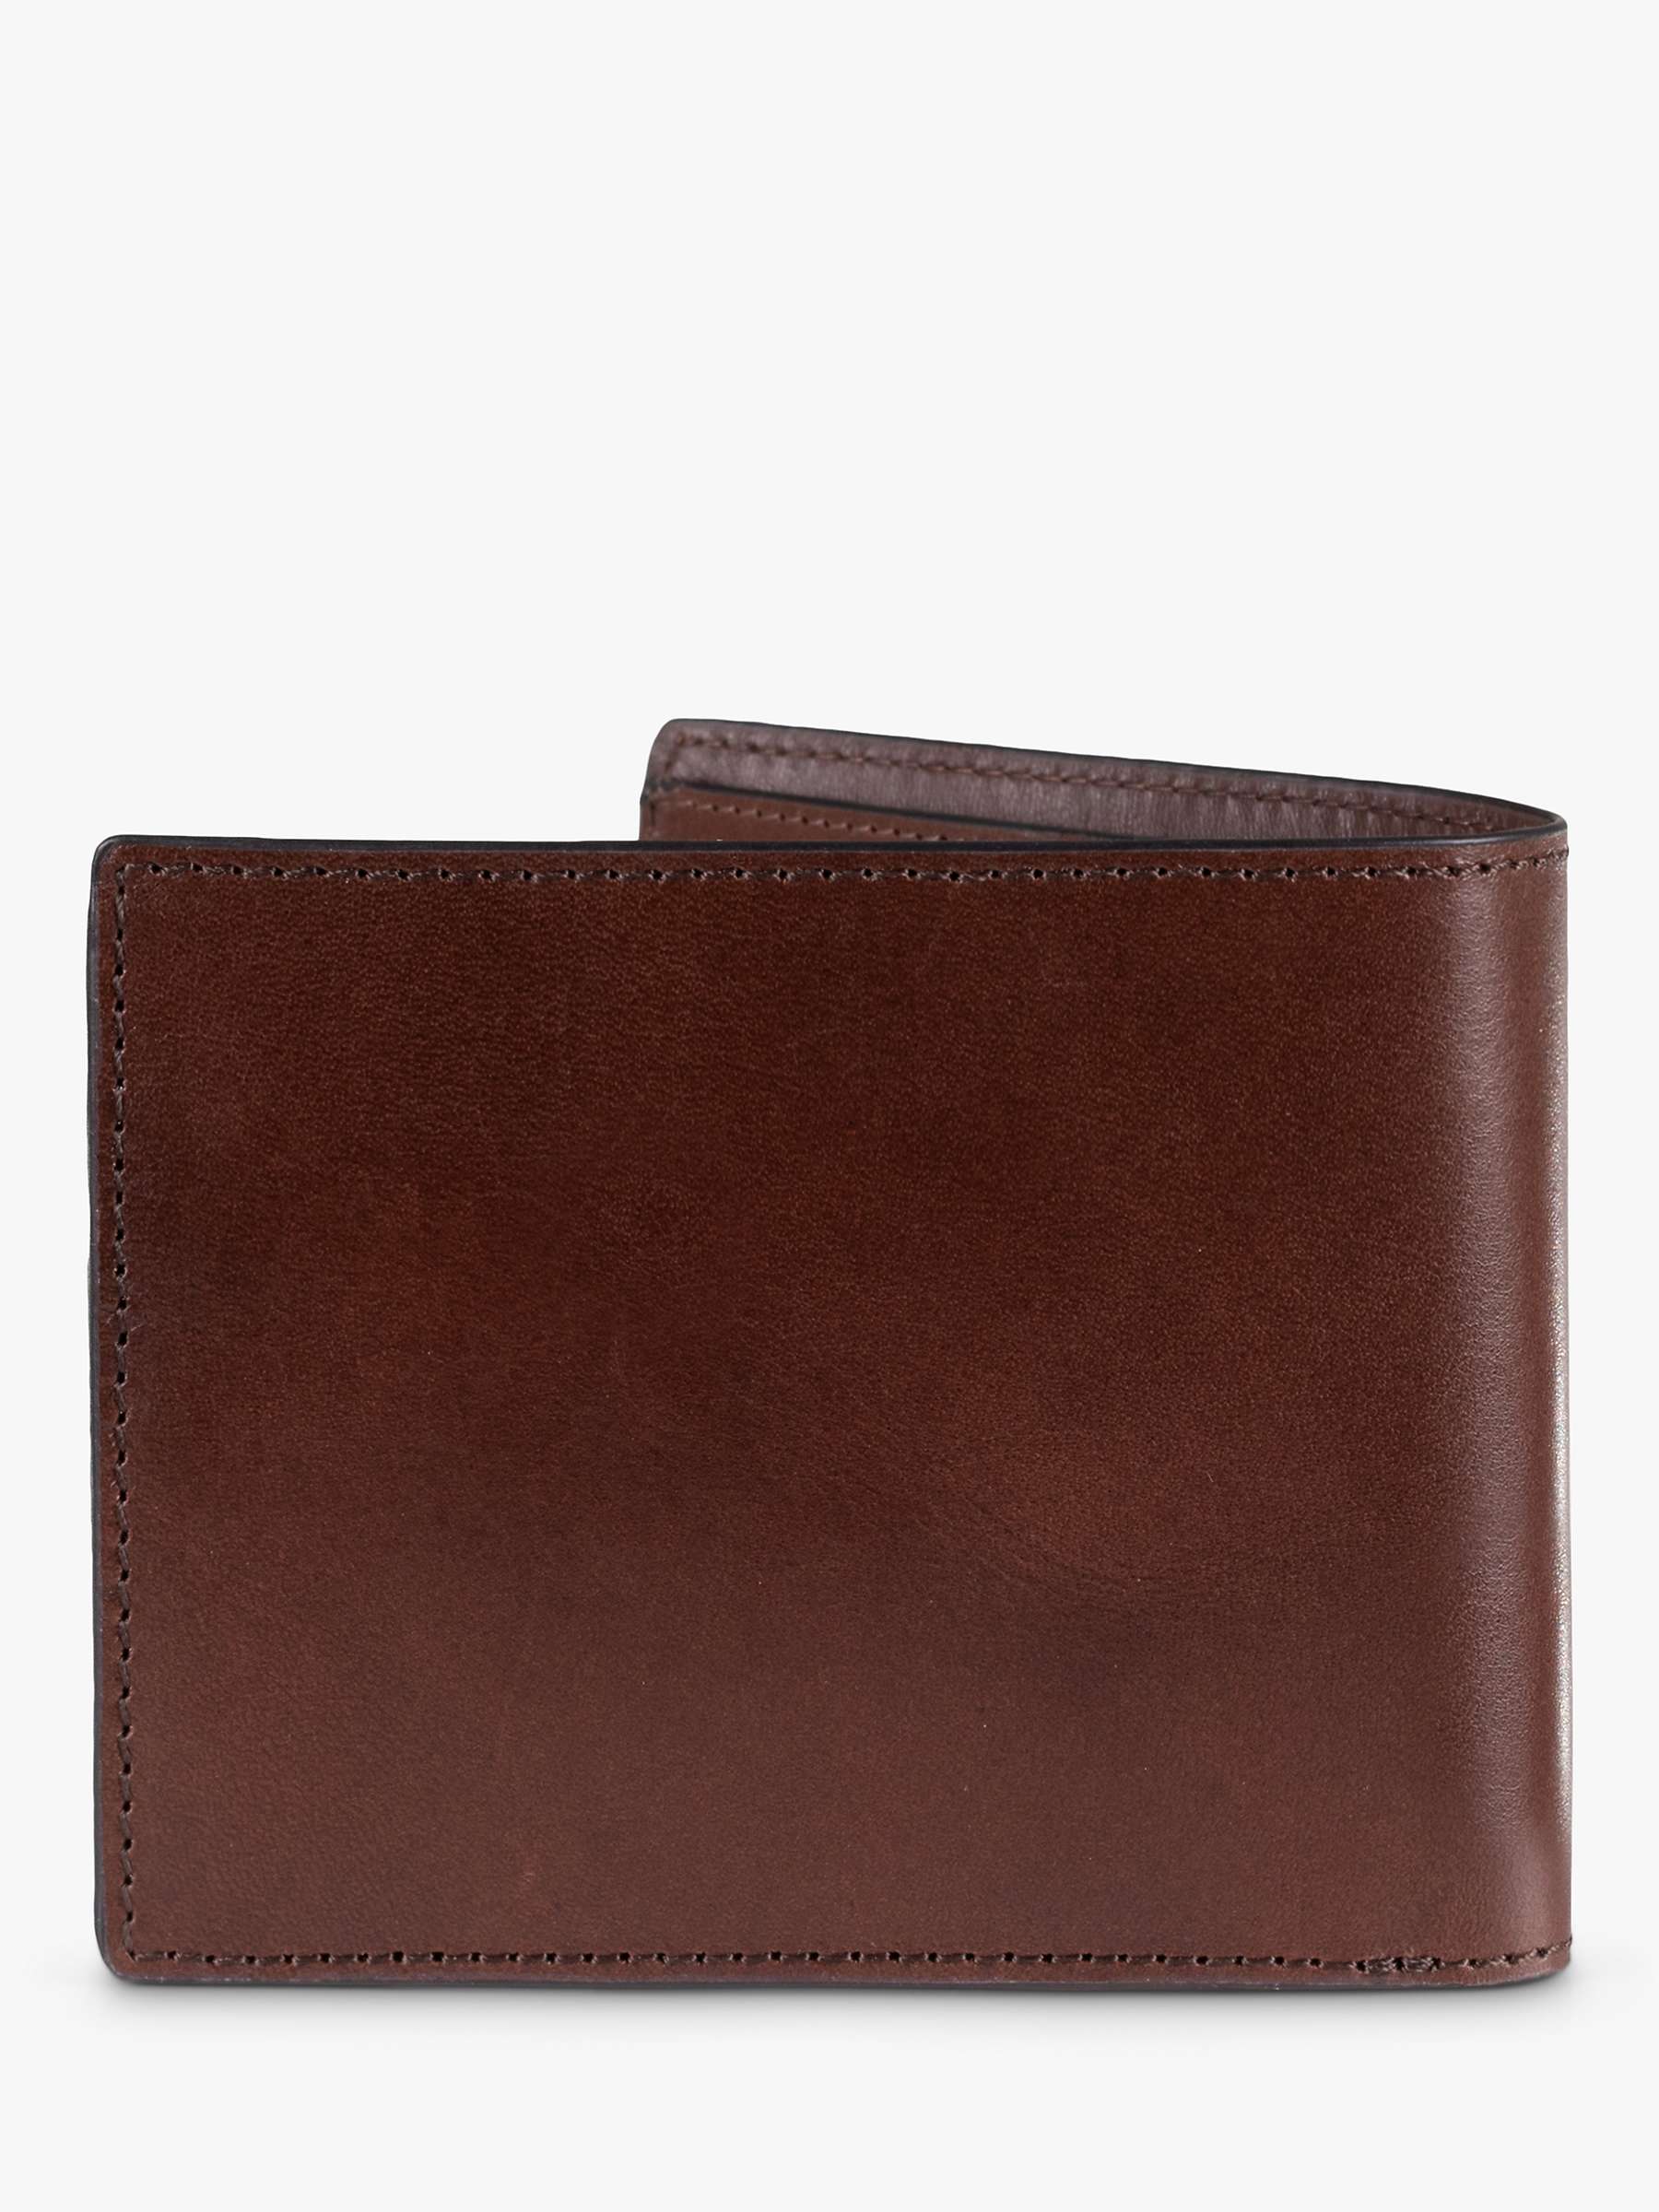 Buy John Lewis Vegetable Tanned Leather Card Coin Bifold Wallet Online at johnlewis.com